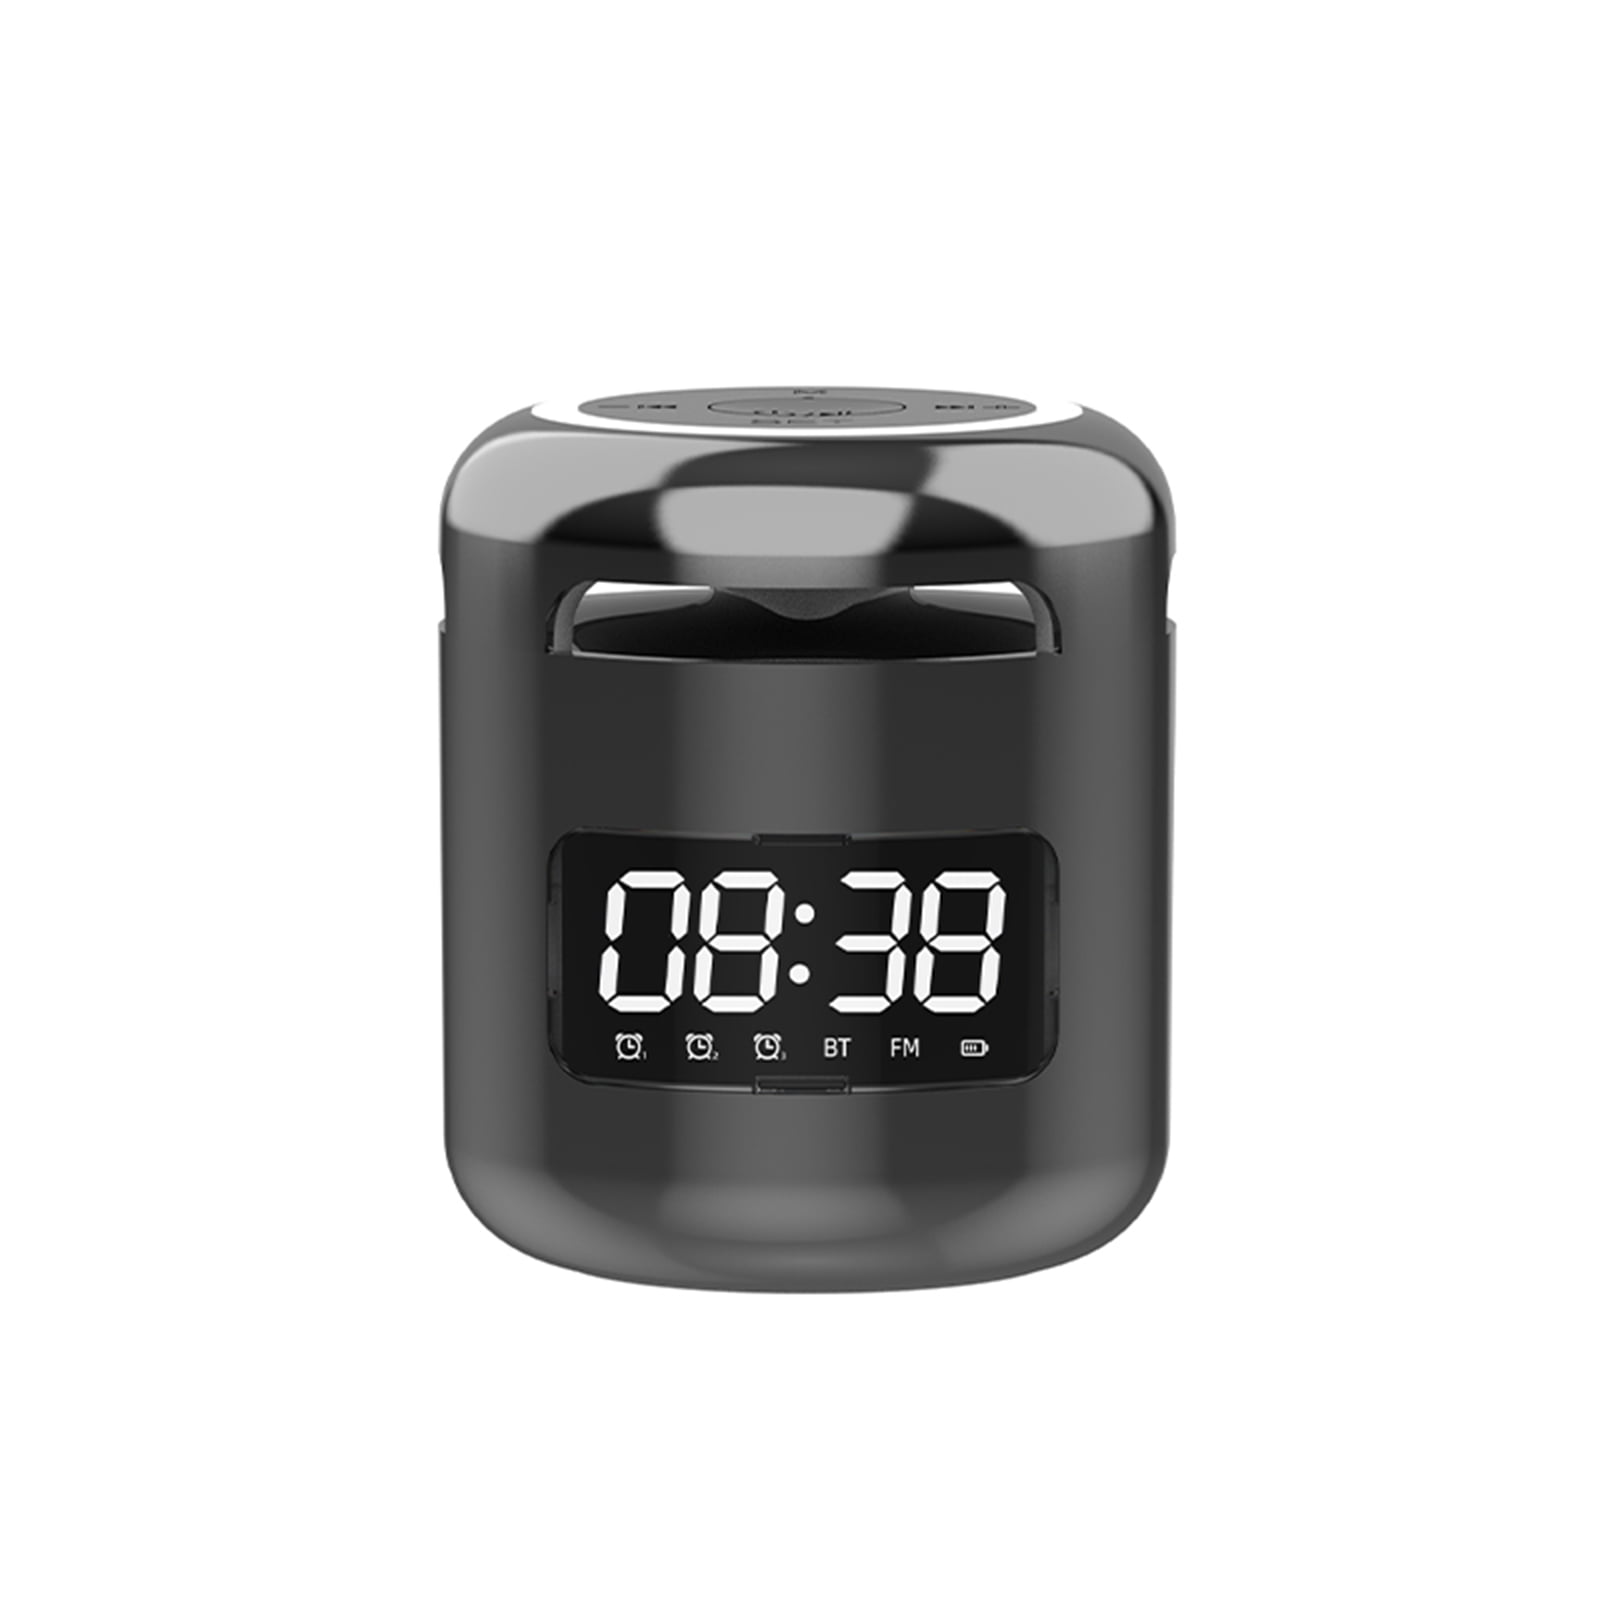 Multi-function Digital LCD Voice Talking Alarm Clock LED Projection Temperature by Kocaso